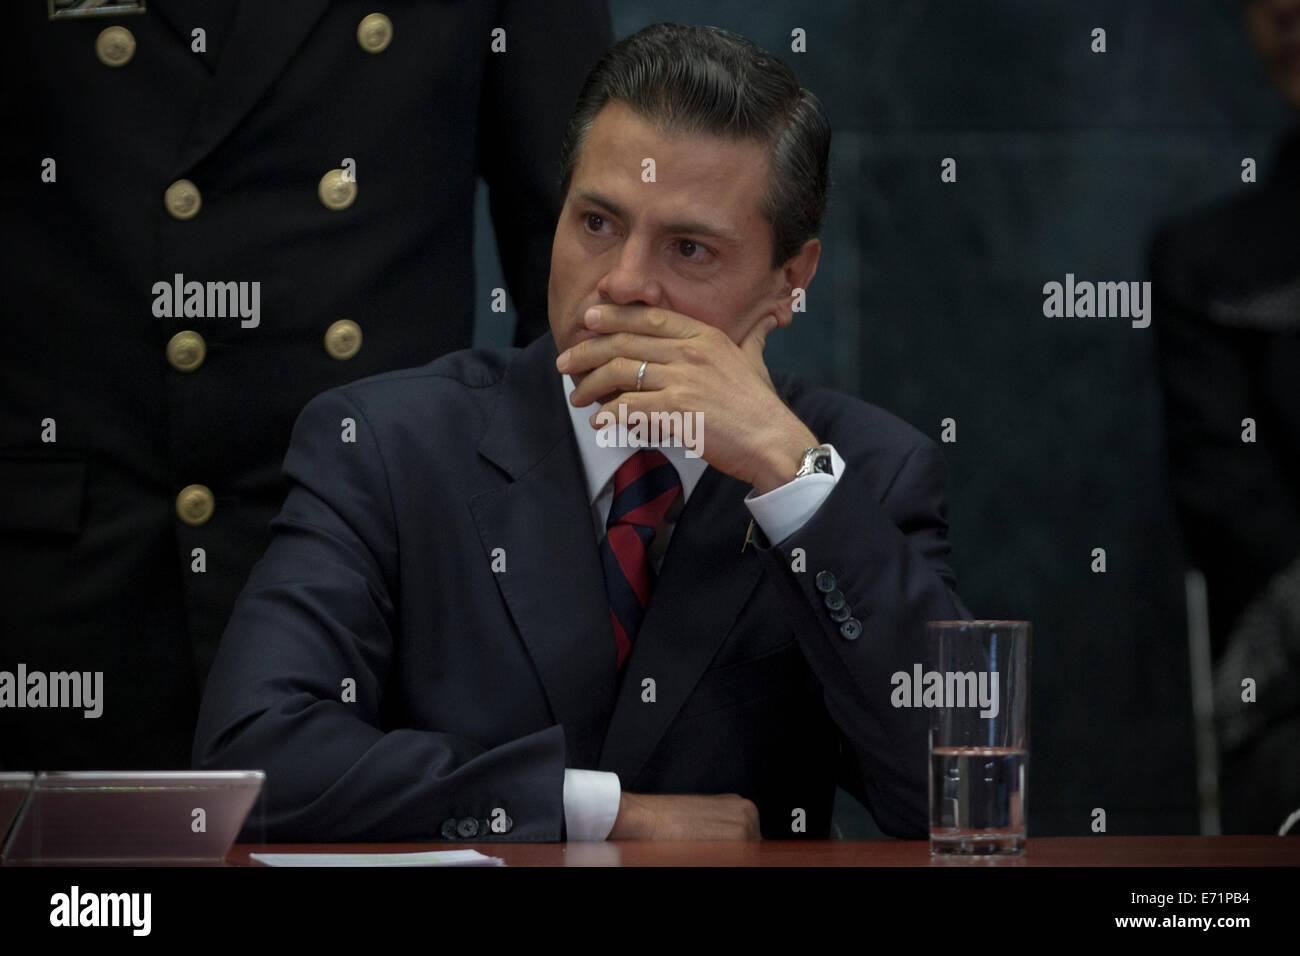 Mexico City, Mexico. 3rd Sep, 2014. The Mexican President, Enrique Pena Nieto, attends a ceremony to announce the winning design for the new international airport in Mexico City, Mexico, on Sept. 3, 2014. British architect Norman Foster and Mexico's Fernando Romero were announced here to be the winners for the design contract of Mexcio City's new airport. With a budget of 9.23 billion U.S. dollars, the new airport will have six landing strips and serve 126 million passengers a year, quadrupling the capacity of the current two-terminal international airport. Credit:  Xinhua/Alamy Live News Stock Photo